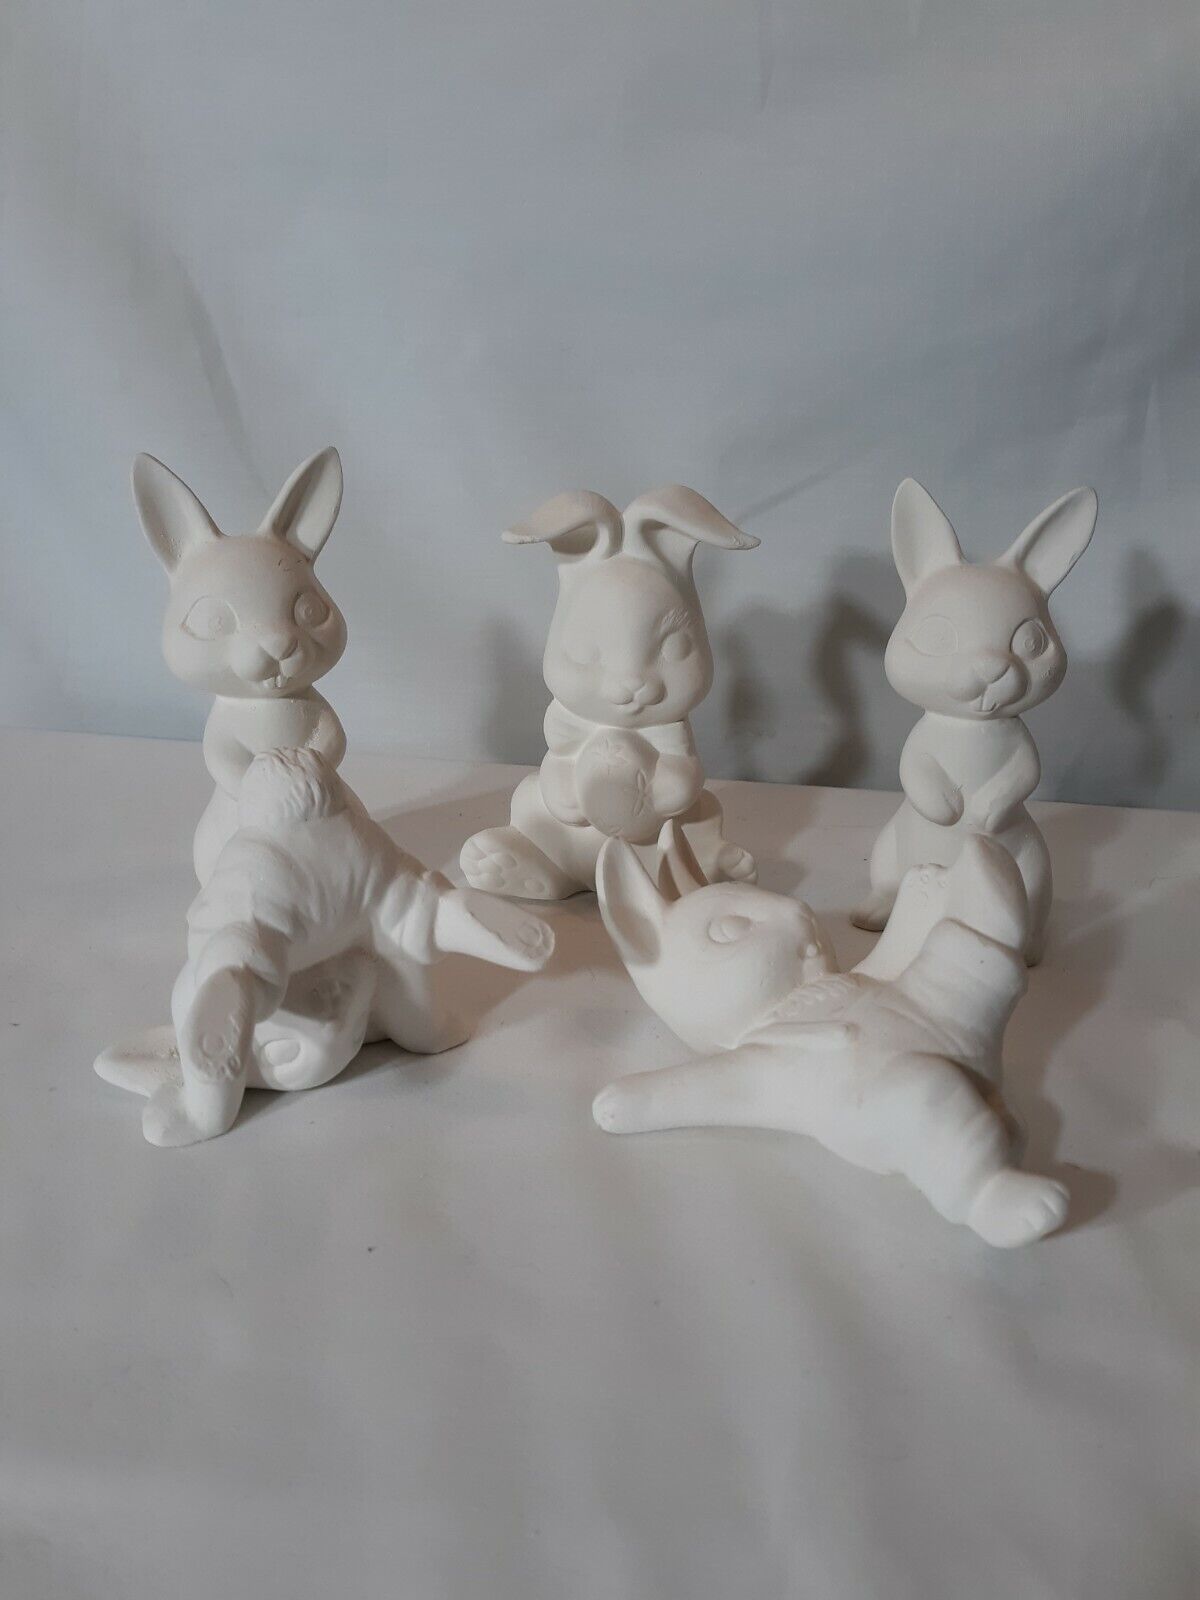 Ceramic Quality inspection Bisque~ excellence Ready to Paint- Misc of Bunnies Easter Lot